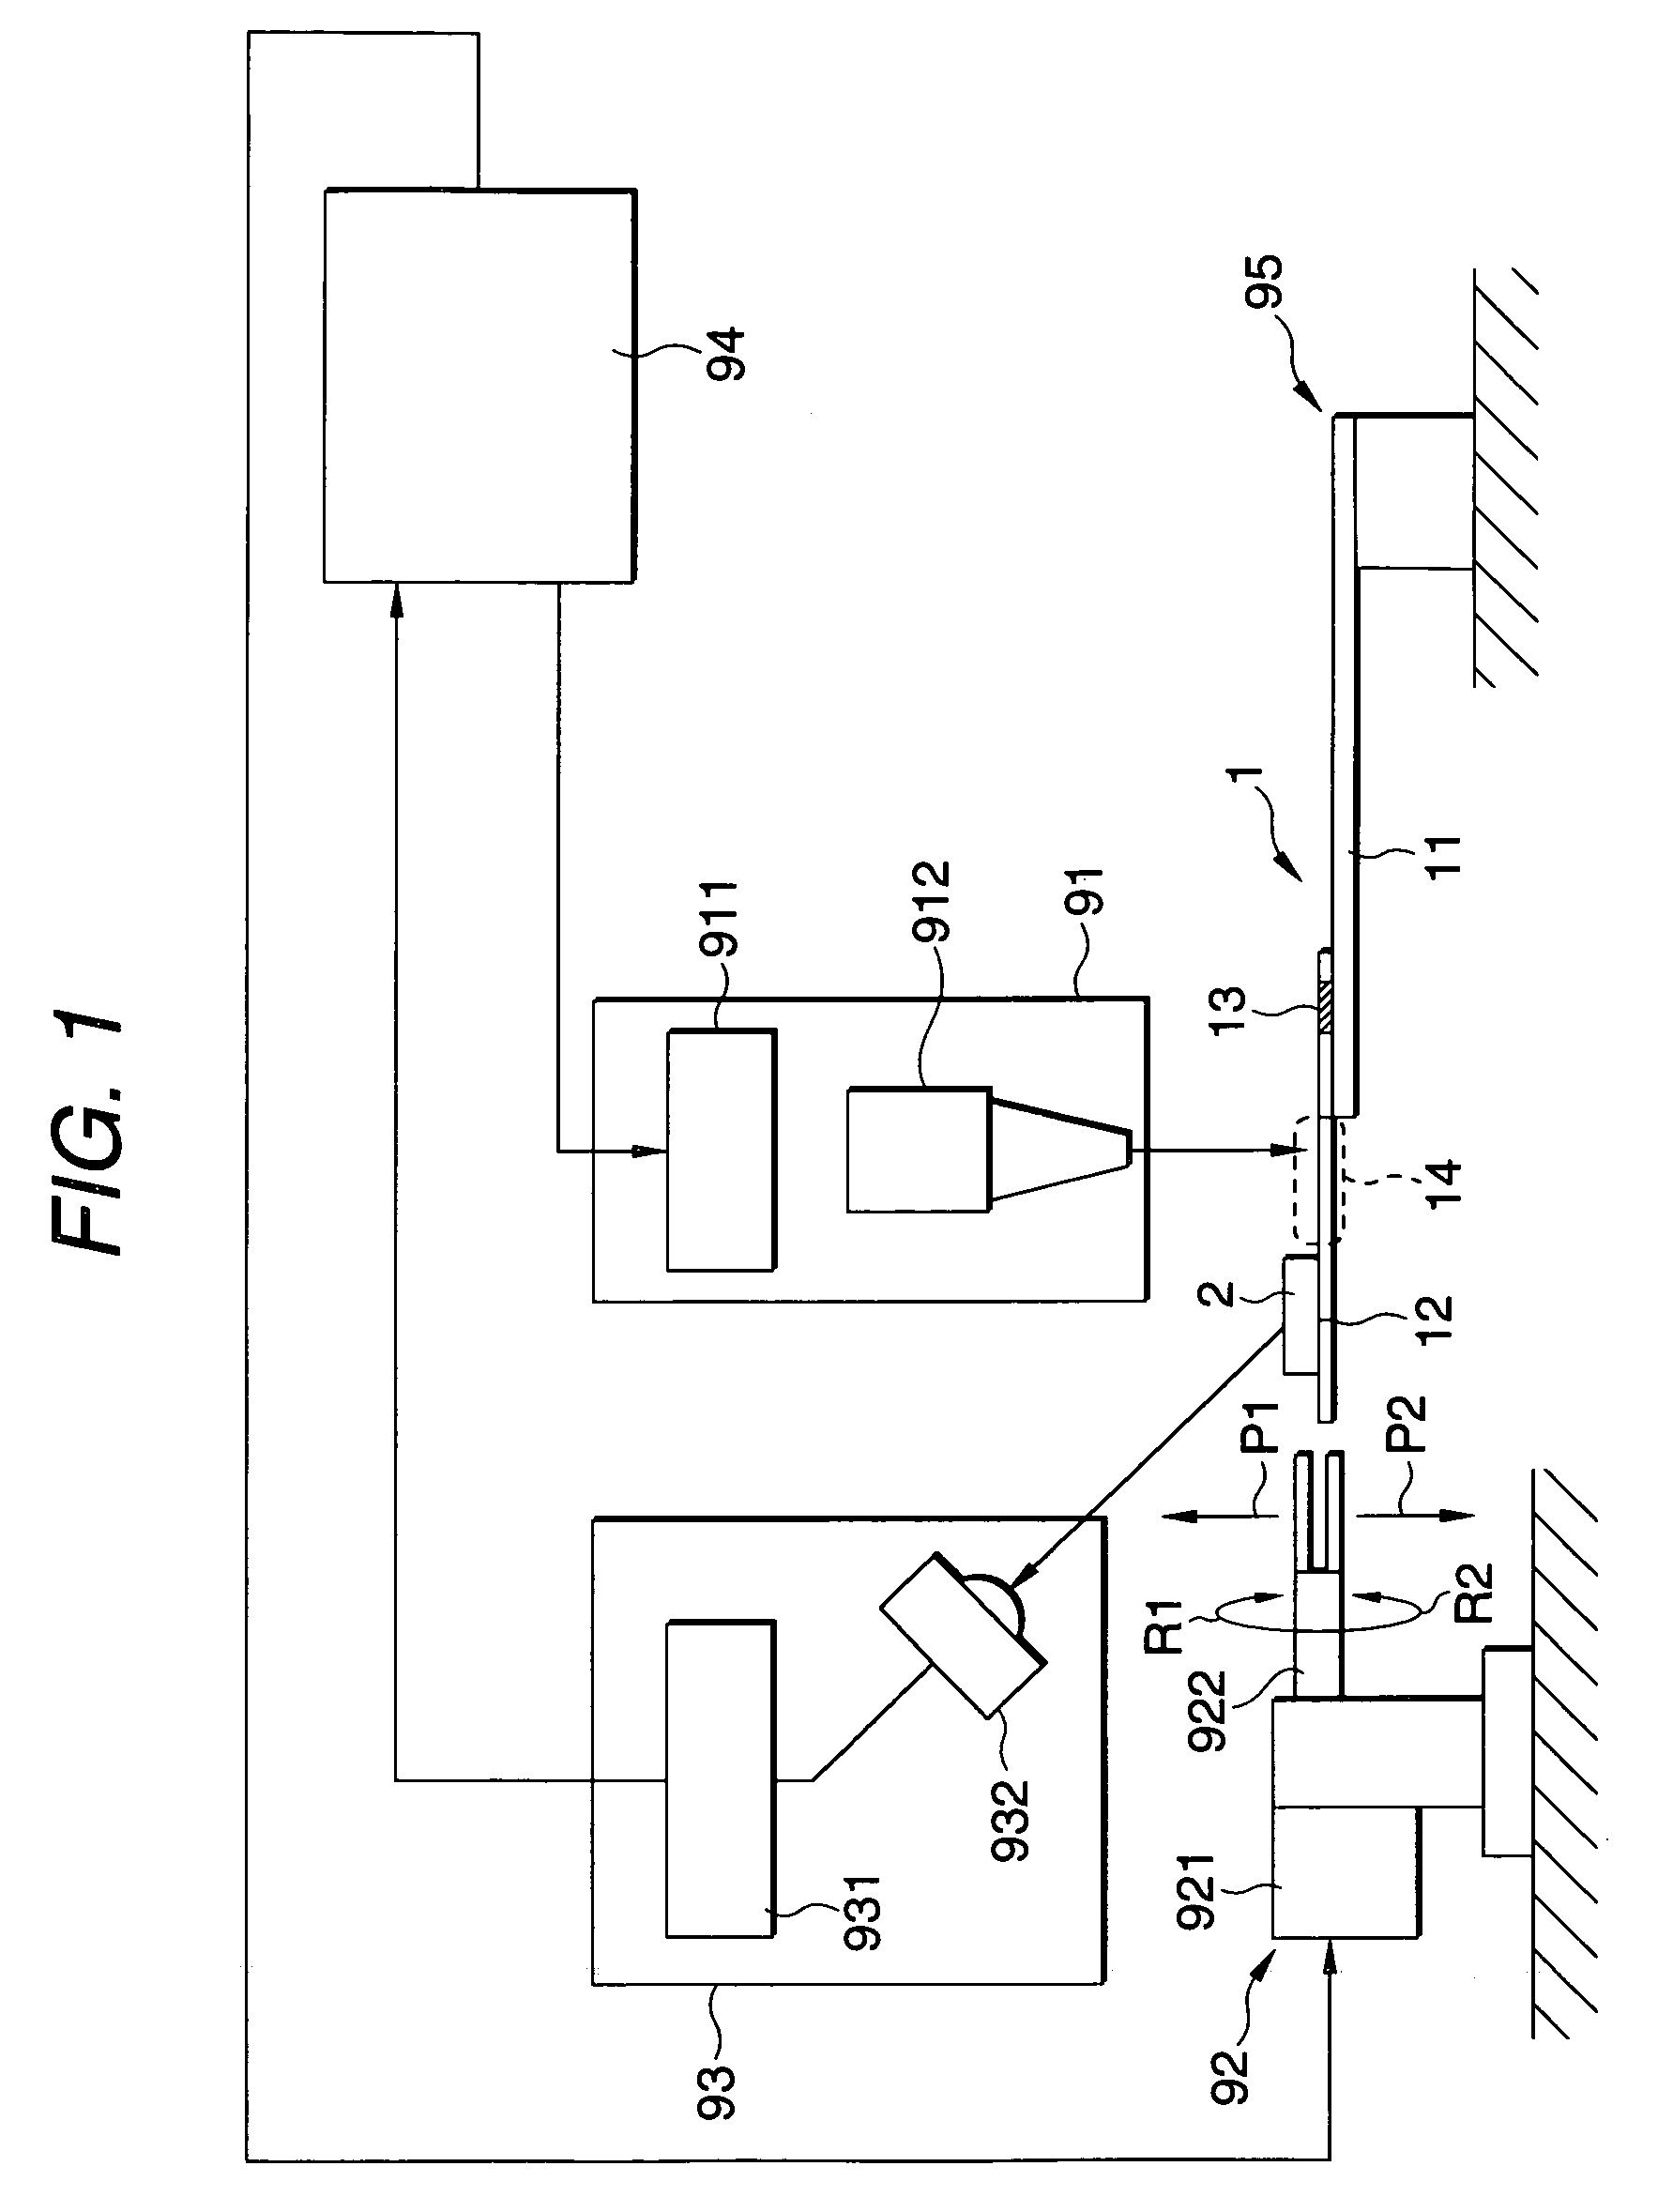 Method and apparatus for adjusting angular position of magnetic head unit